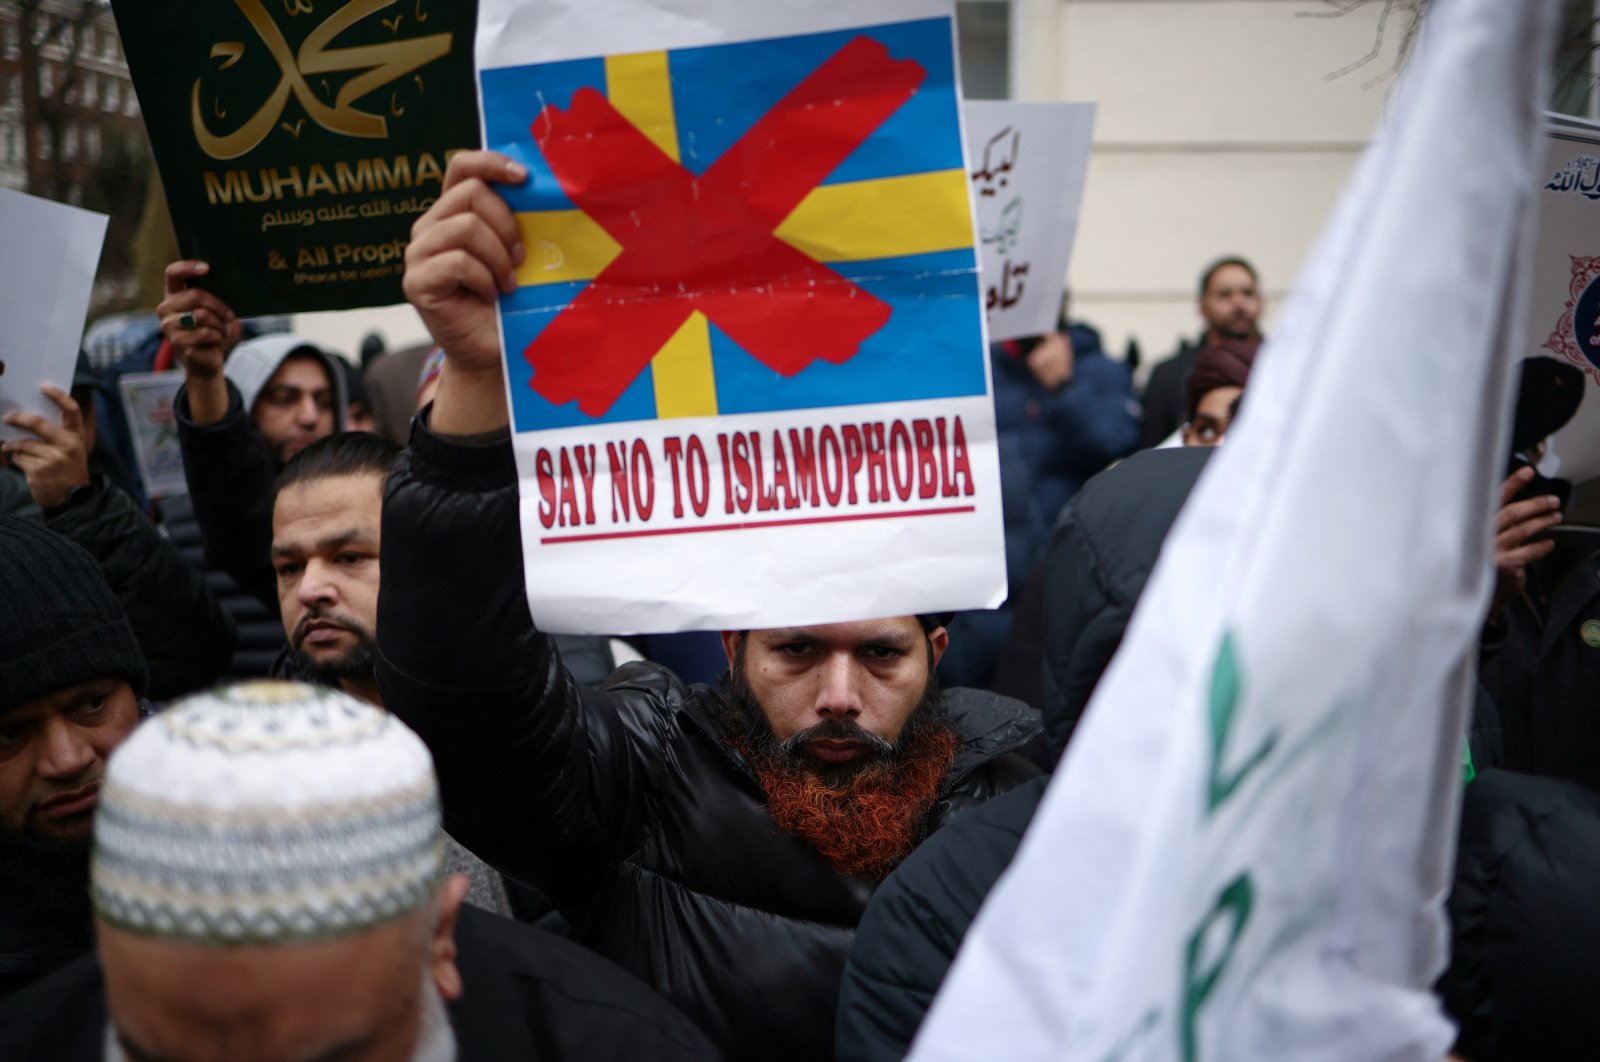 A man displays a placard during a protest following the burning of the Quran in Stockholm, outside the Embassy of Sweden in London, Britain, Jan. 28, 2023. (Reuters Photo)